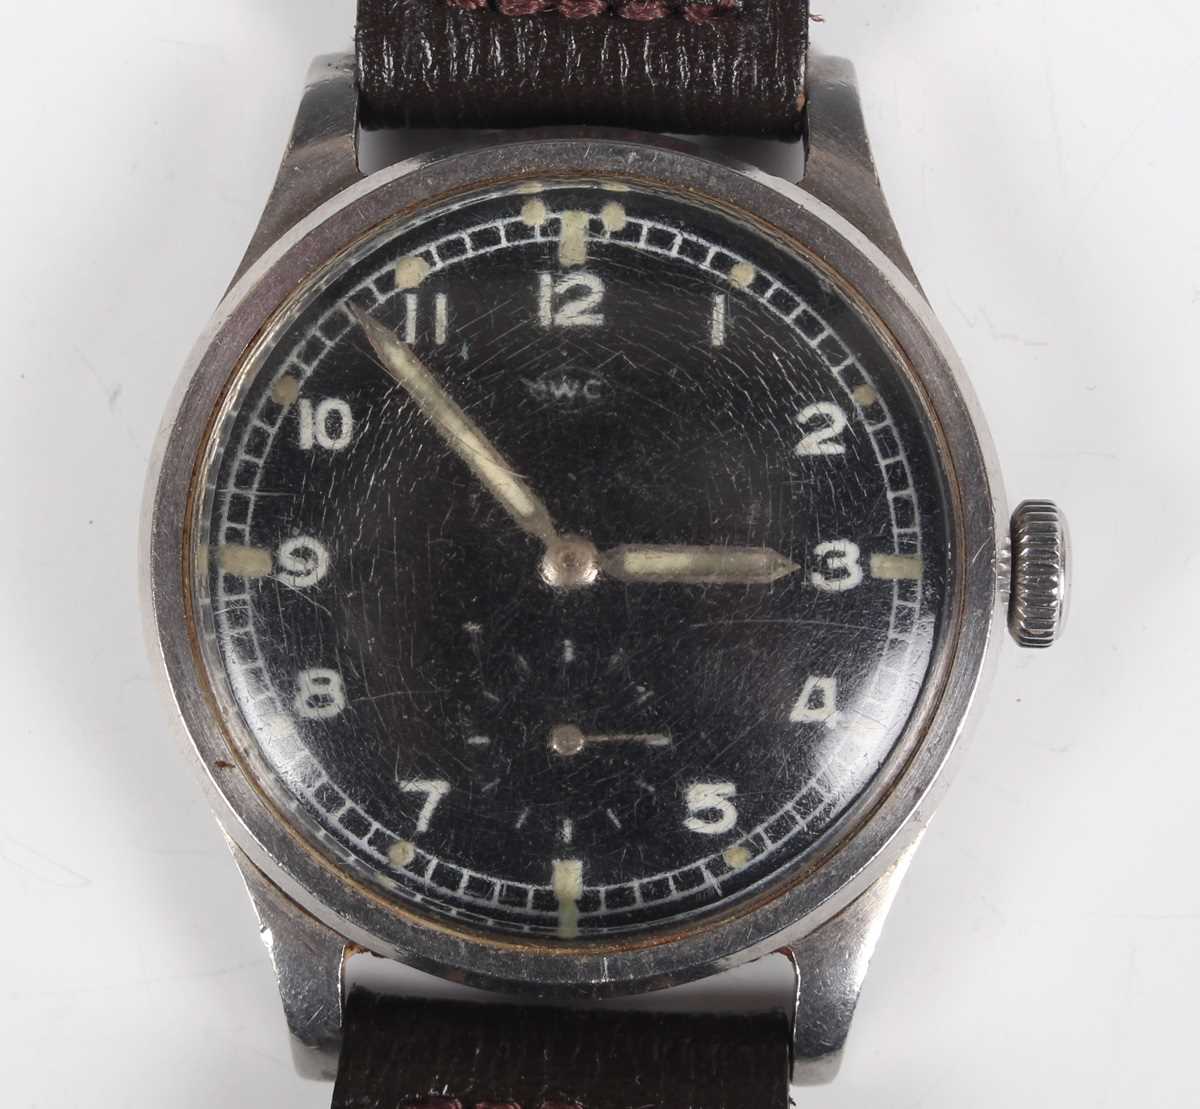 An International Watch Co (IWC) steel cased gentleman's wristwatch, circa 1943-44, the signed and